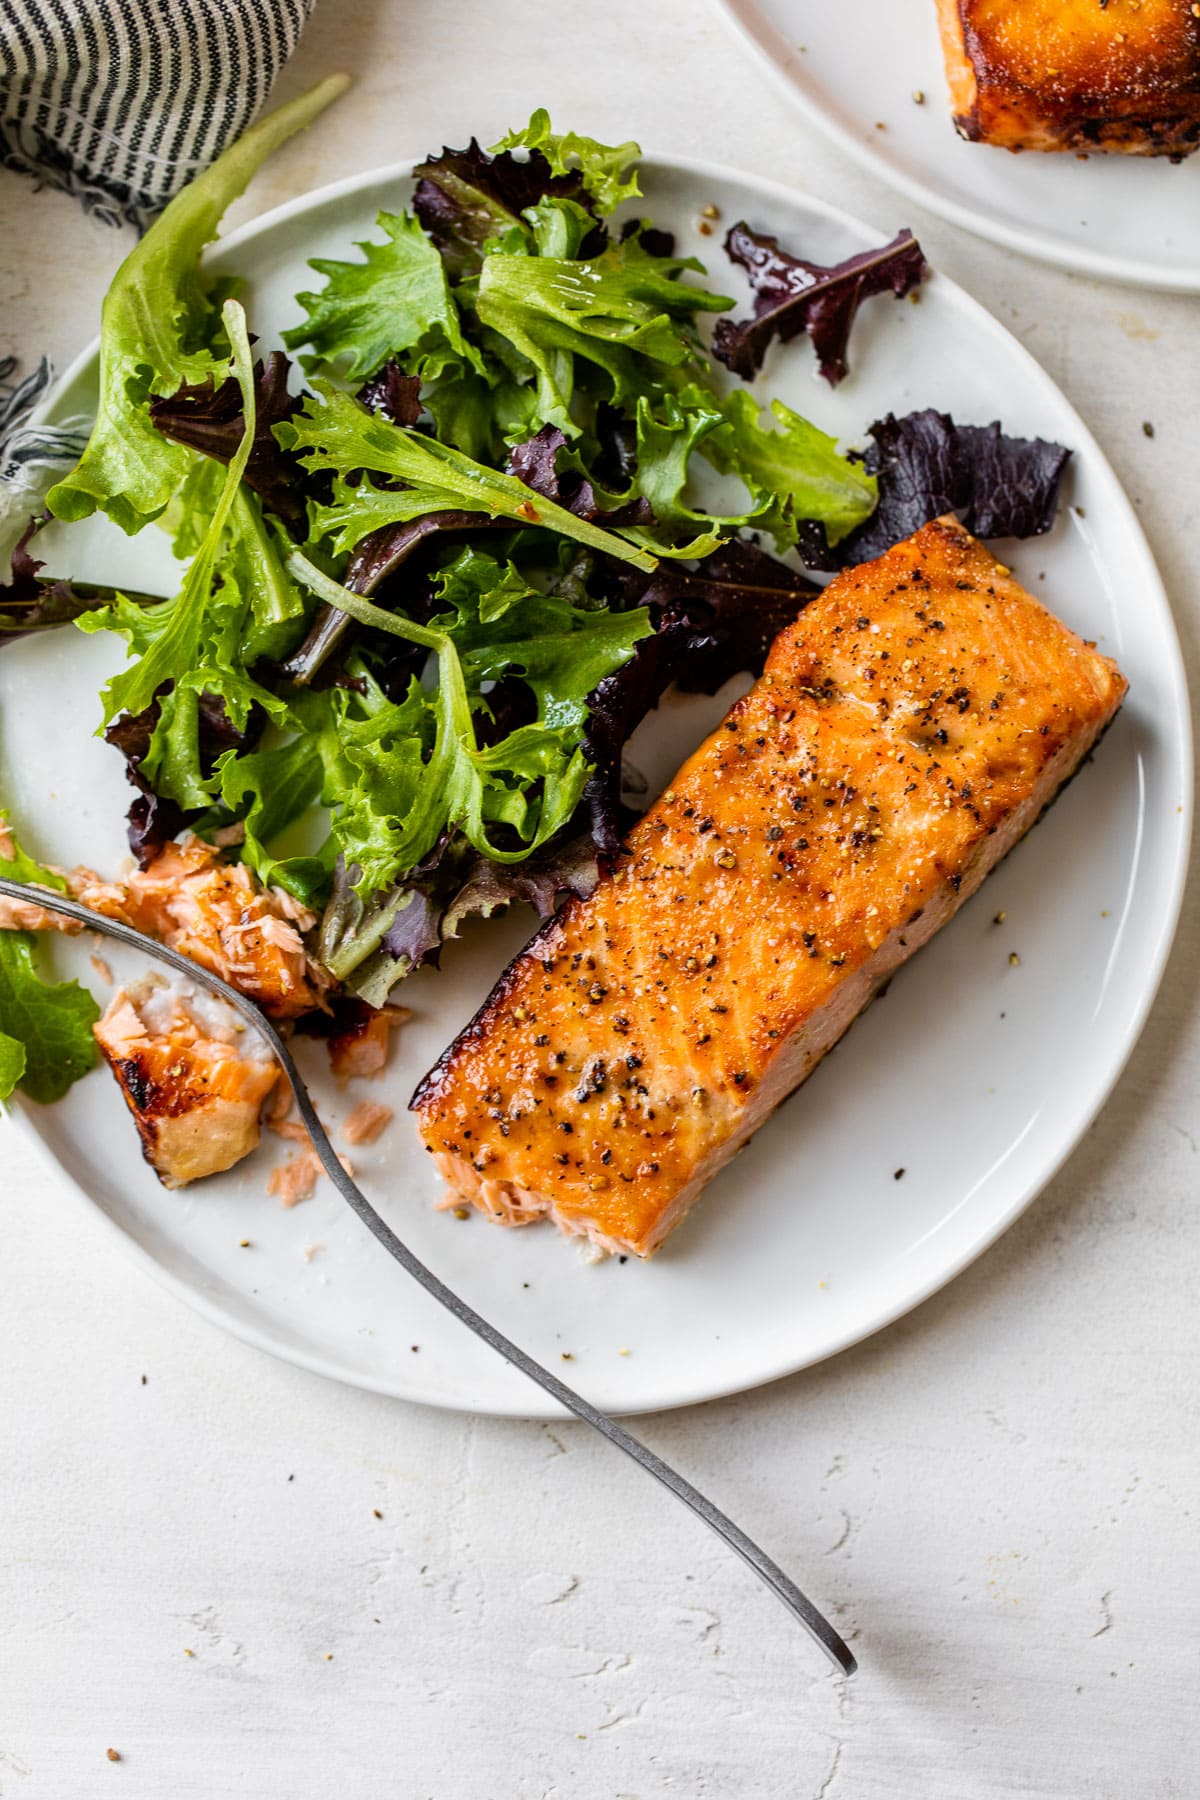 Salad and air fryer salmon on a plate